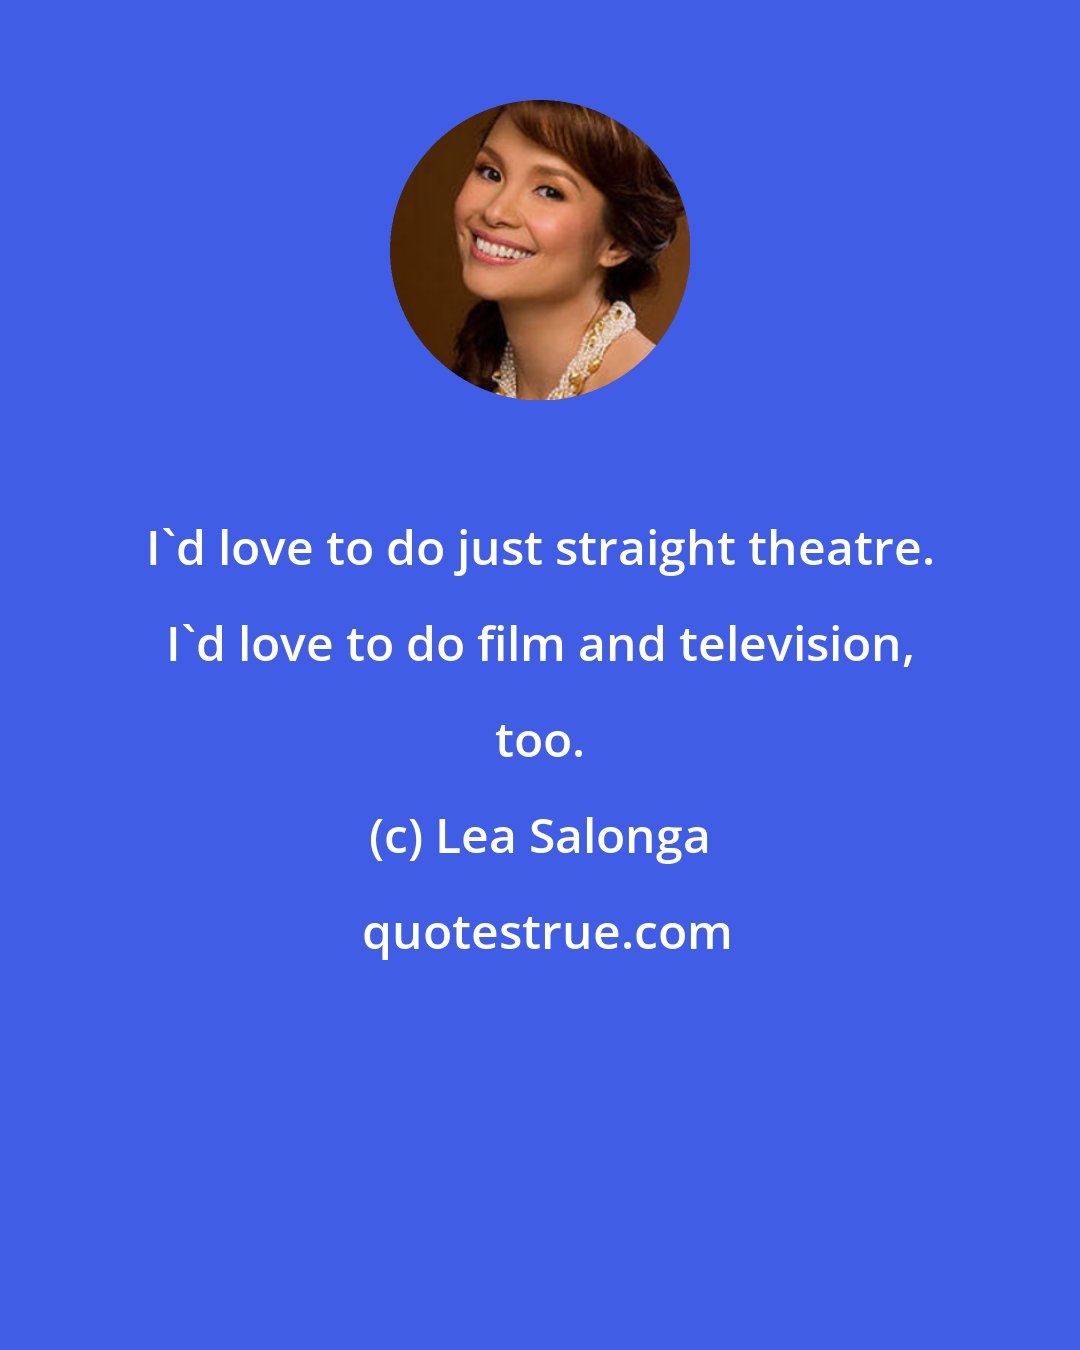 Lea Salonga: I'd love to do just straight theatre. I'd love to do film and television, too.